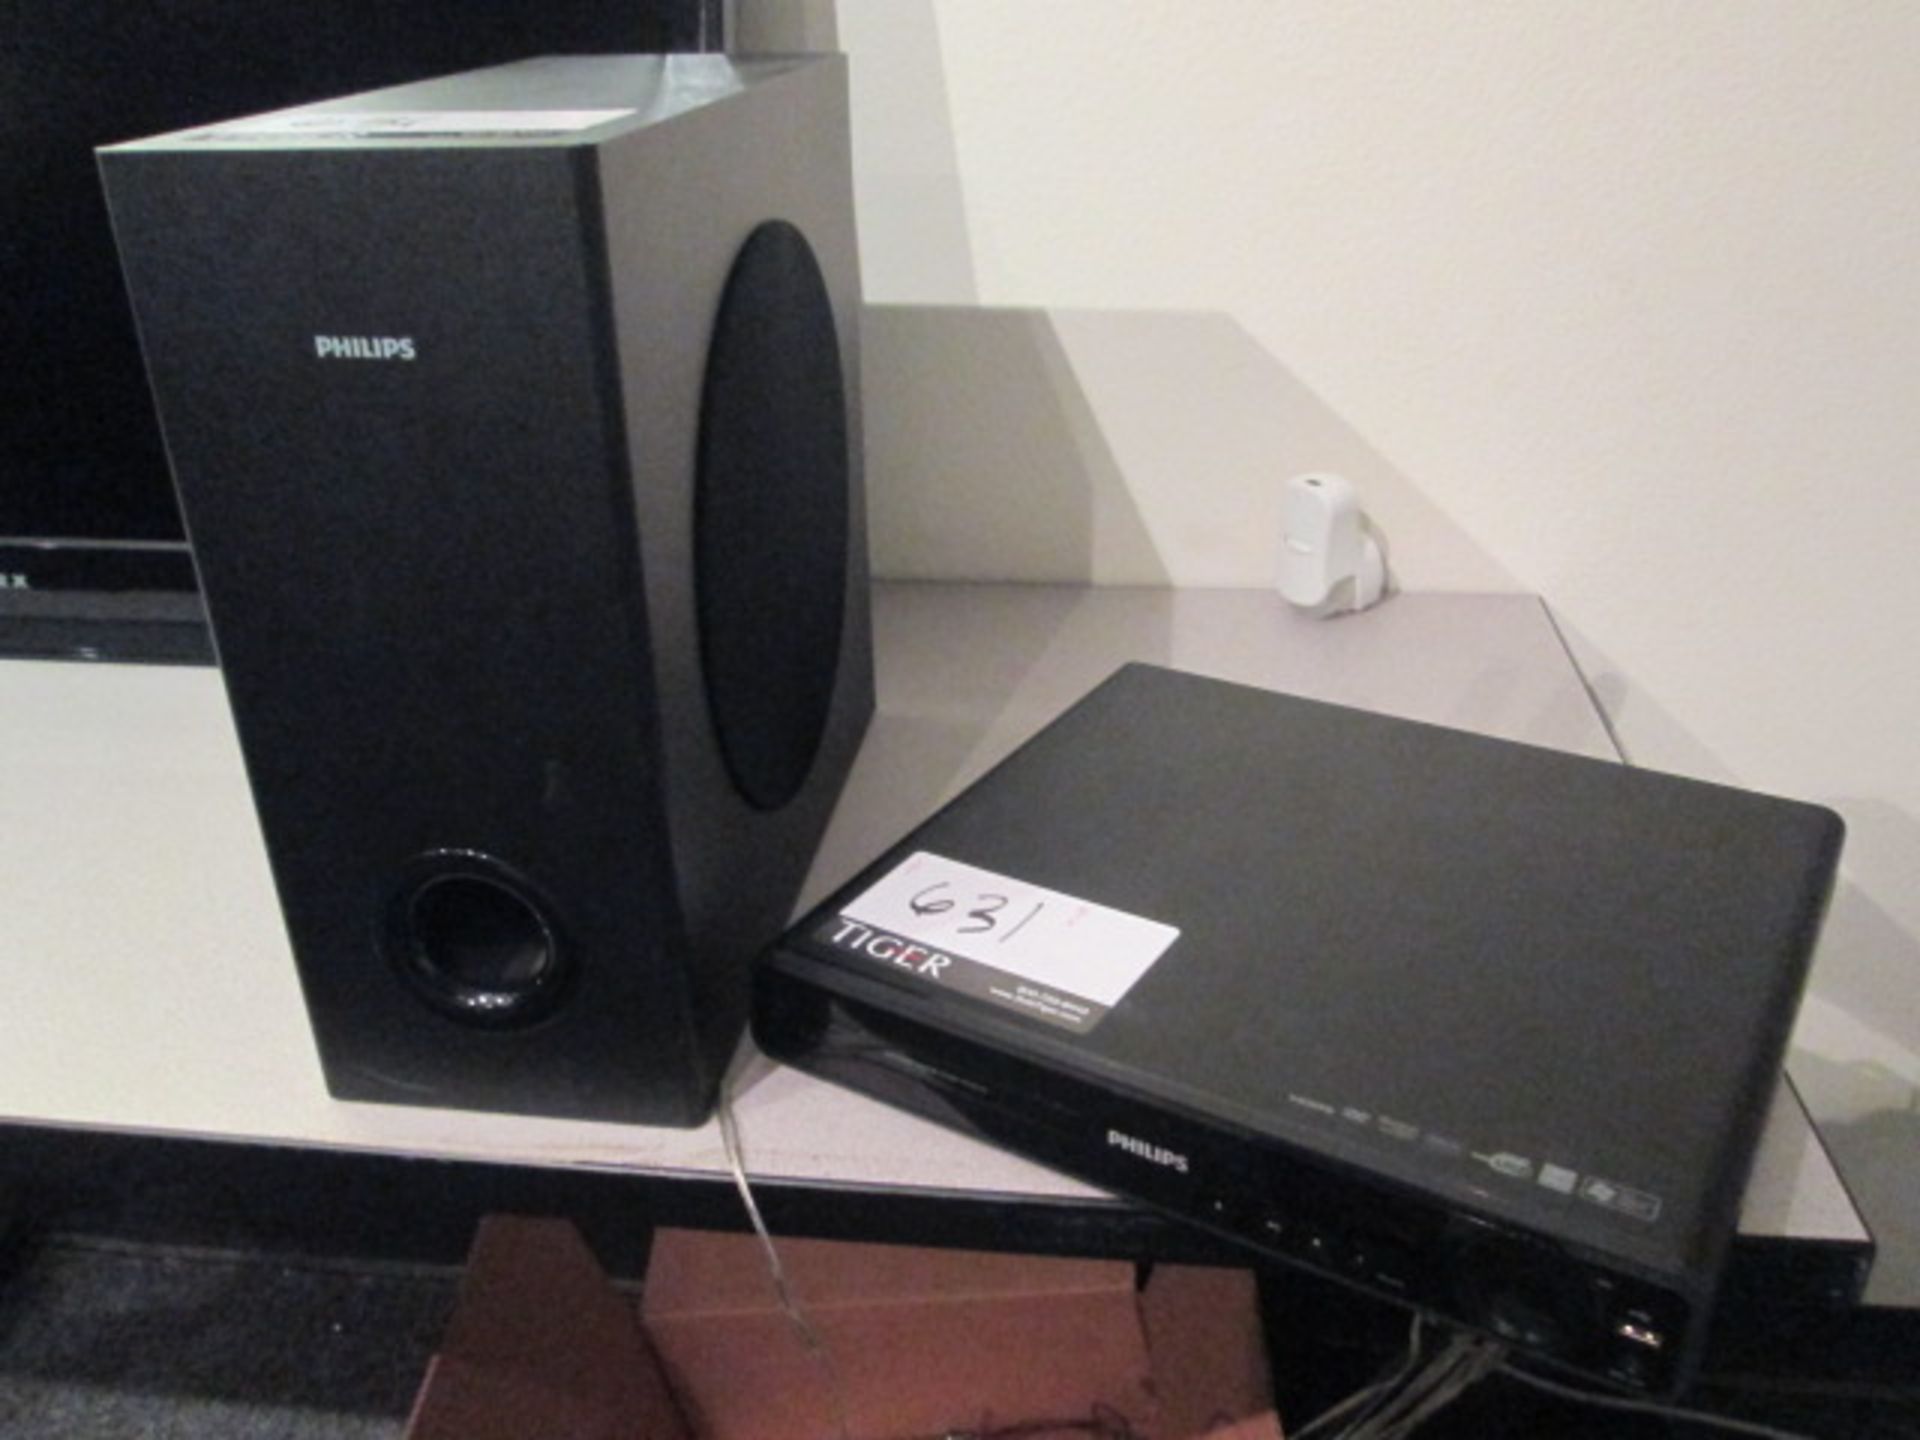 Phillips Surround Sound System, M/N- HTS 33171D/57, w/ (4) Speakers, Lot Location: Offices, Site